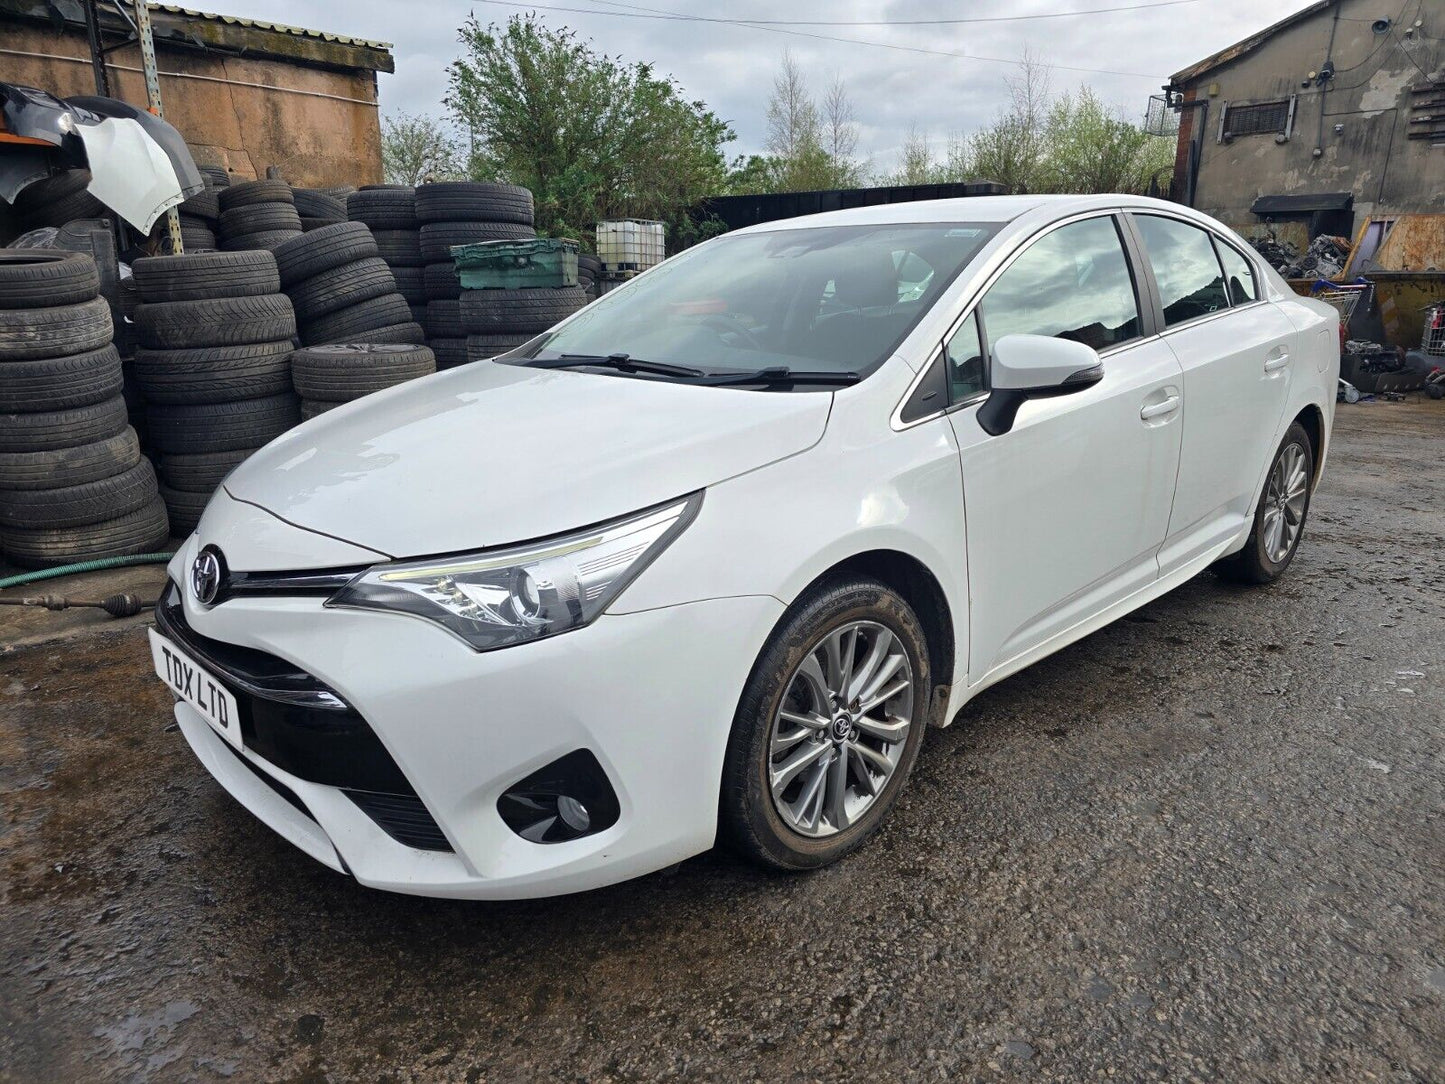 2017 TOYOTA AVENSIS BUSINESS EDITION MK3 T270 1.6 DIESEL MANUAL PARTS SPARES